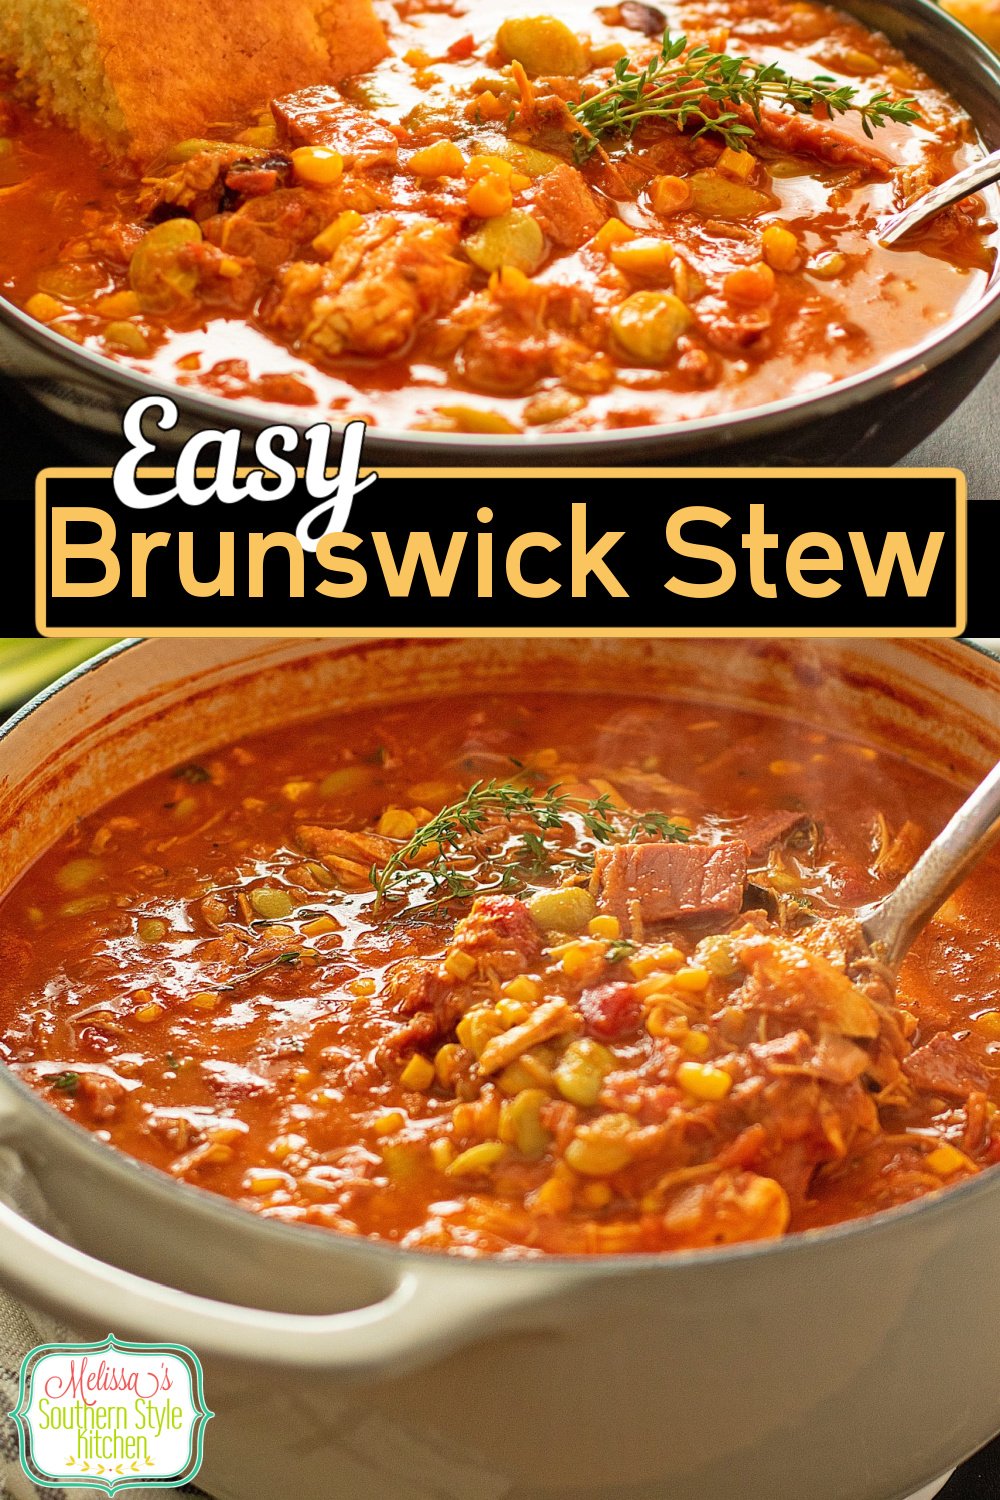 This perfectly seasoned Brunswick Stew features pulled chicken, smoked pork and smoked brisket combined with classic lima beans and corn. #brunswickstew #chickenstew #stewrecipes #easystewrecipes #pulledpork #smokedbrisketrecipes #soup #easybrunswickstew via @melissasssk